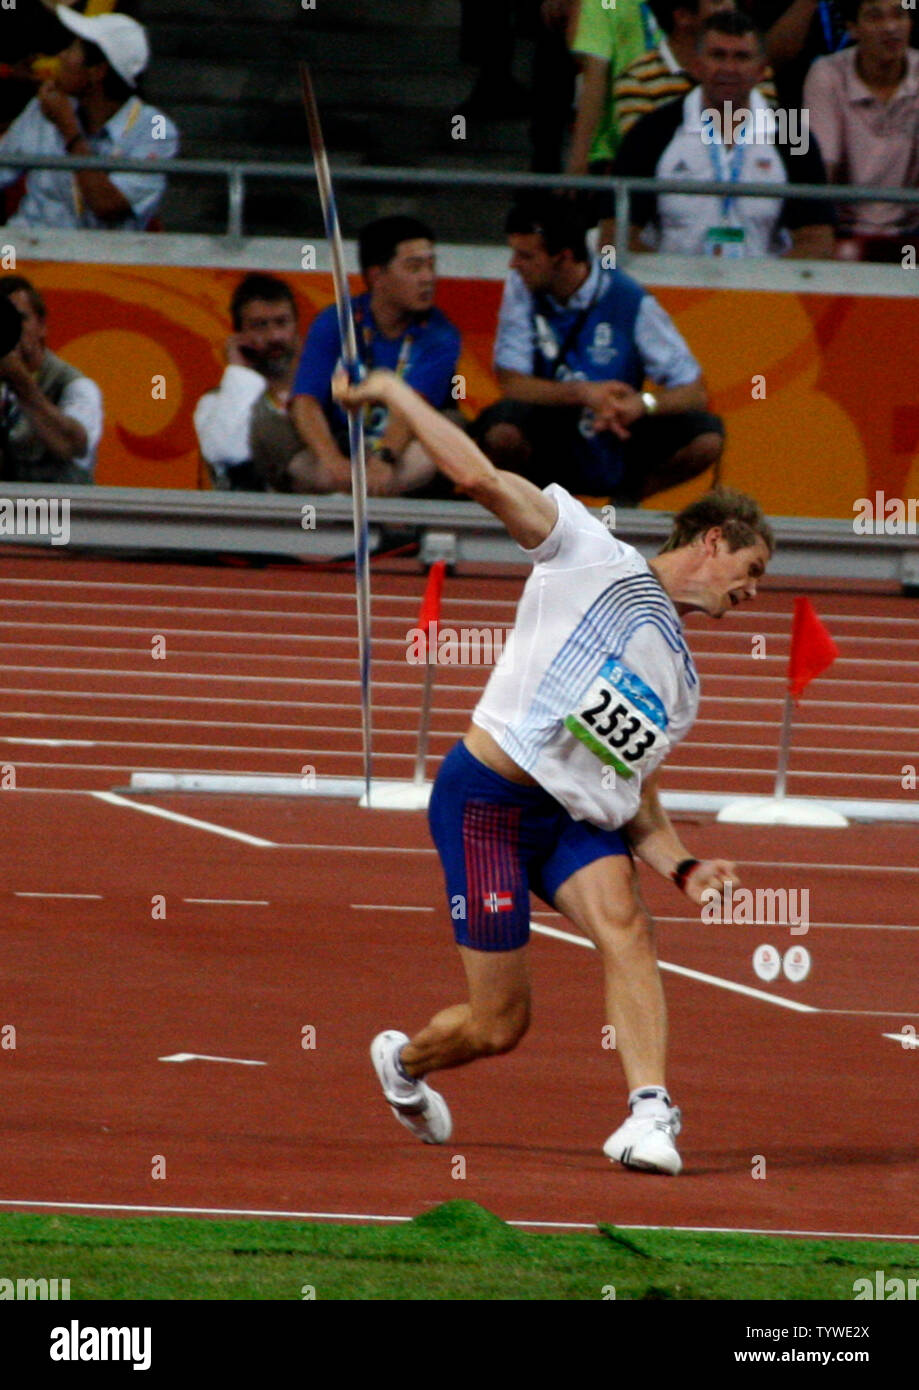 Andreas Thorkildsen of Norway throws a javelin on his way to winning gold in the men's javelin throw in the National Stadium at the Summer Olympics in Beijing on August 23, 2008.    (UPI Photo/Terry Schmitt) Stock Photo